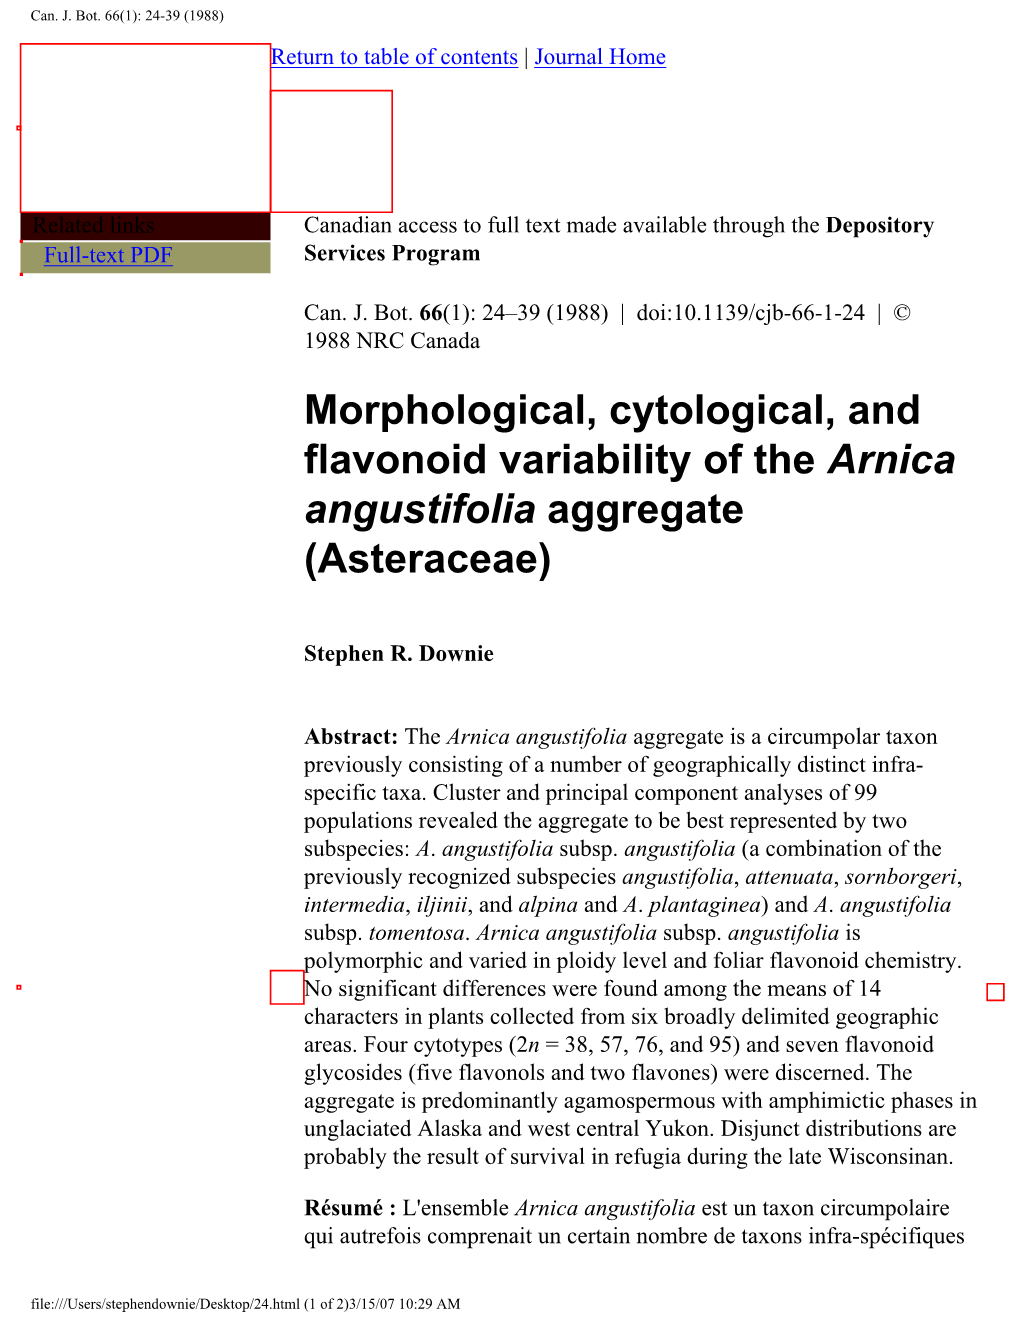 Morphological, Cytological, and Flavonoid Variability of the Arnica Angustifolia Aggregate (Asteraceae)